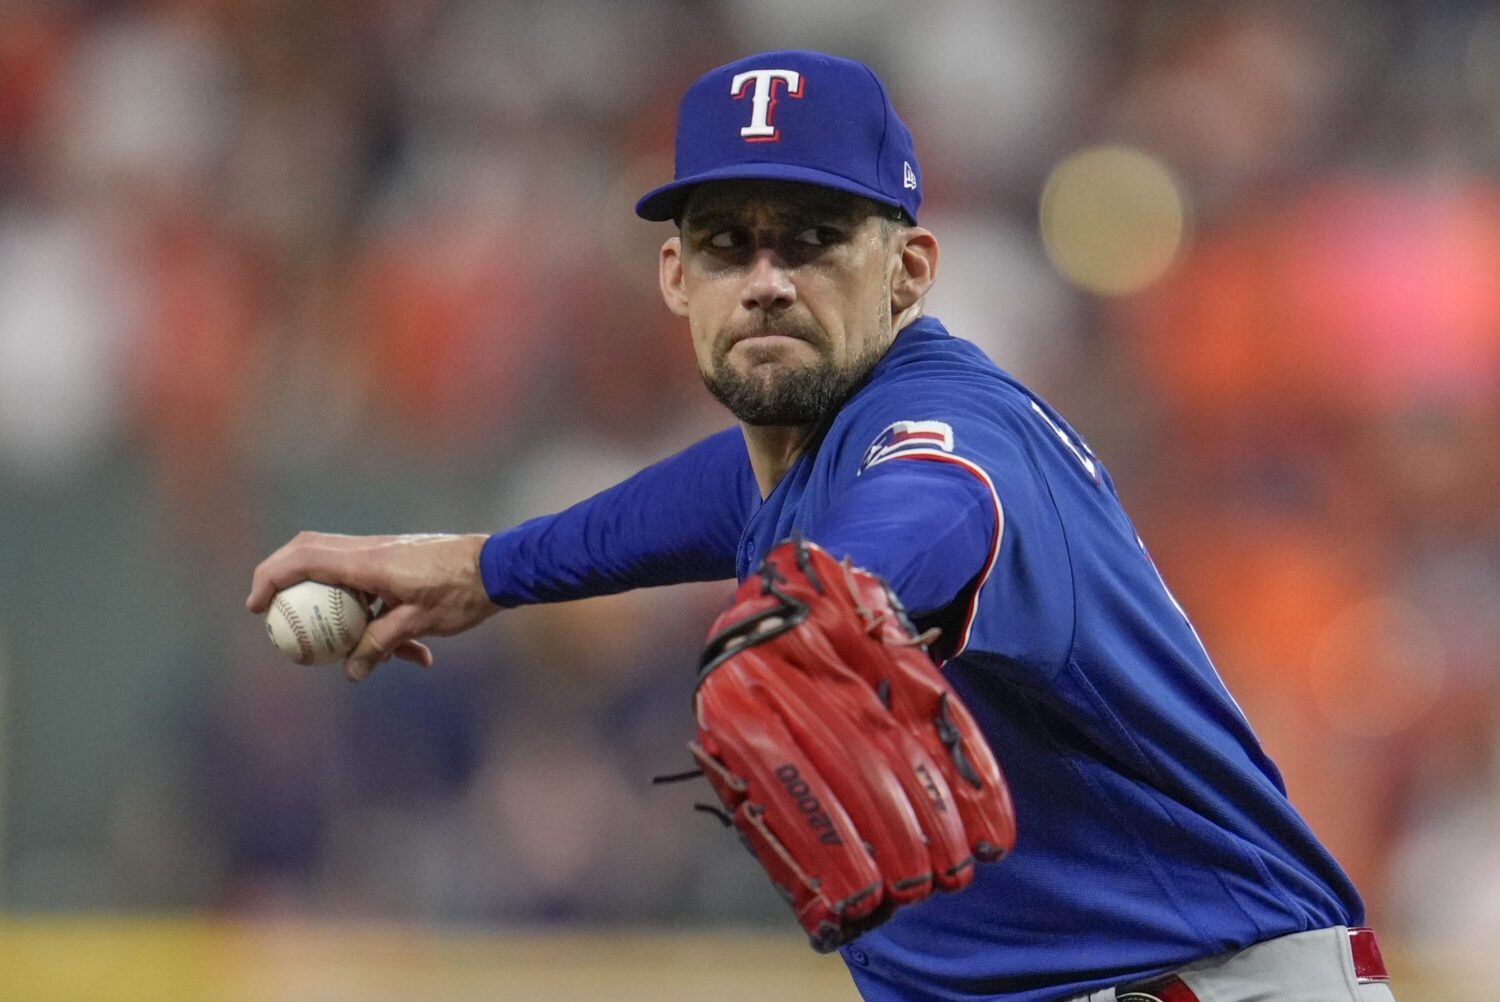 Texas Rangers to give Adolis Garcia opportunity to develop